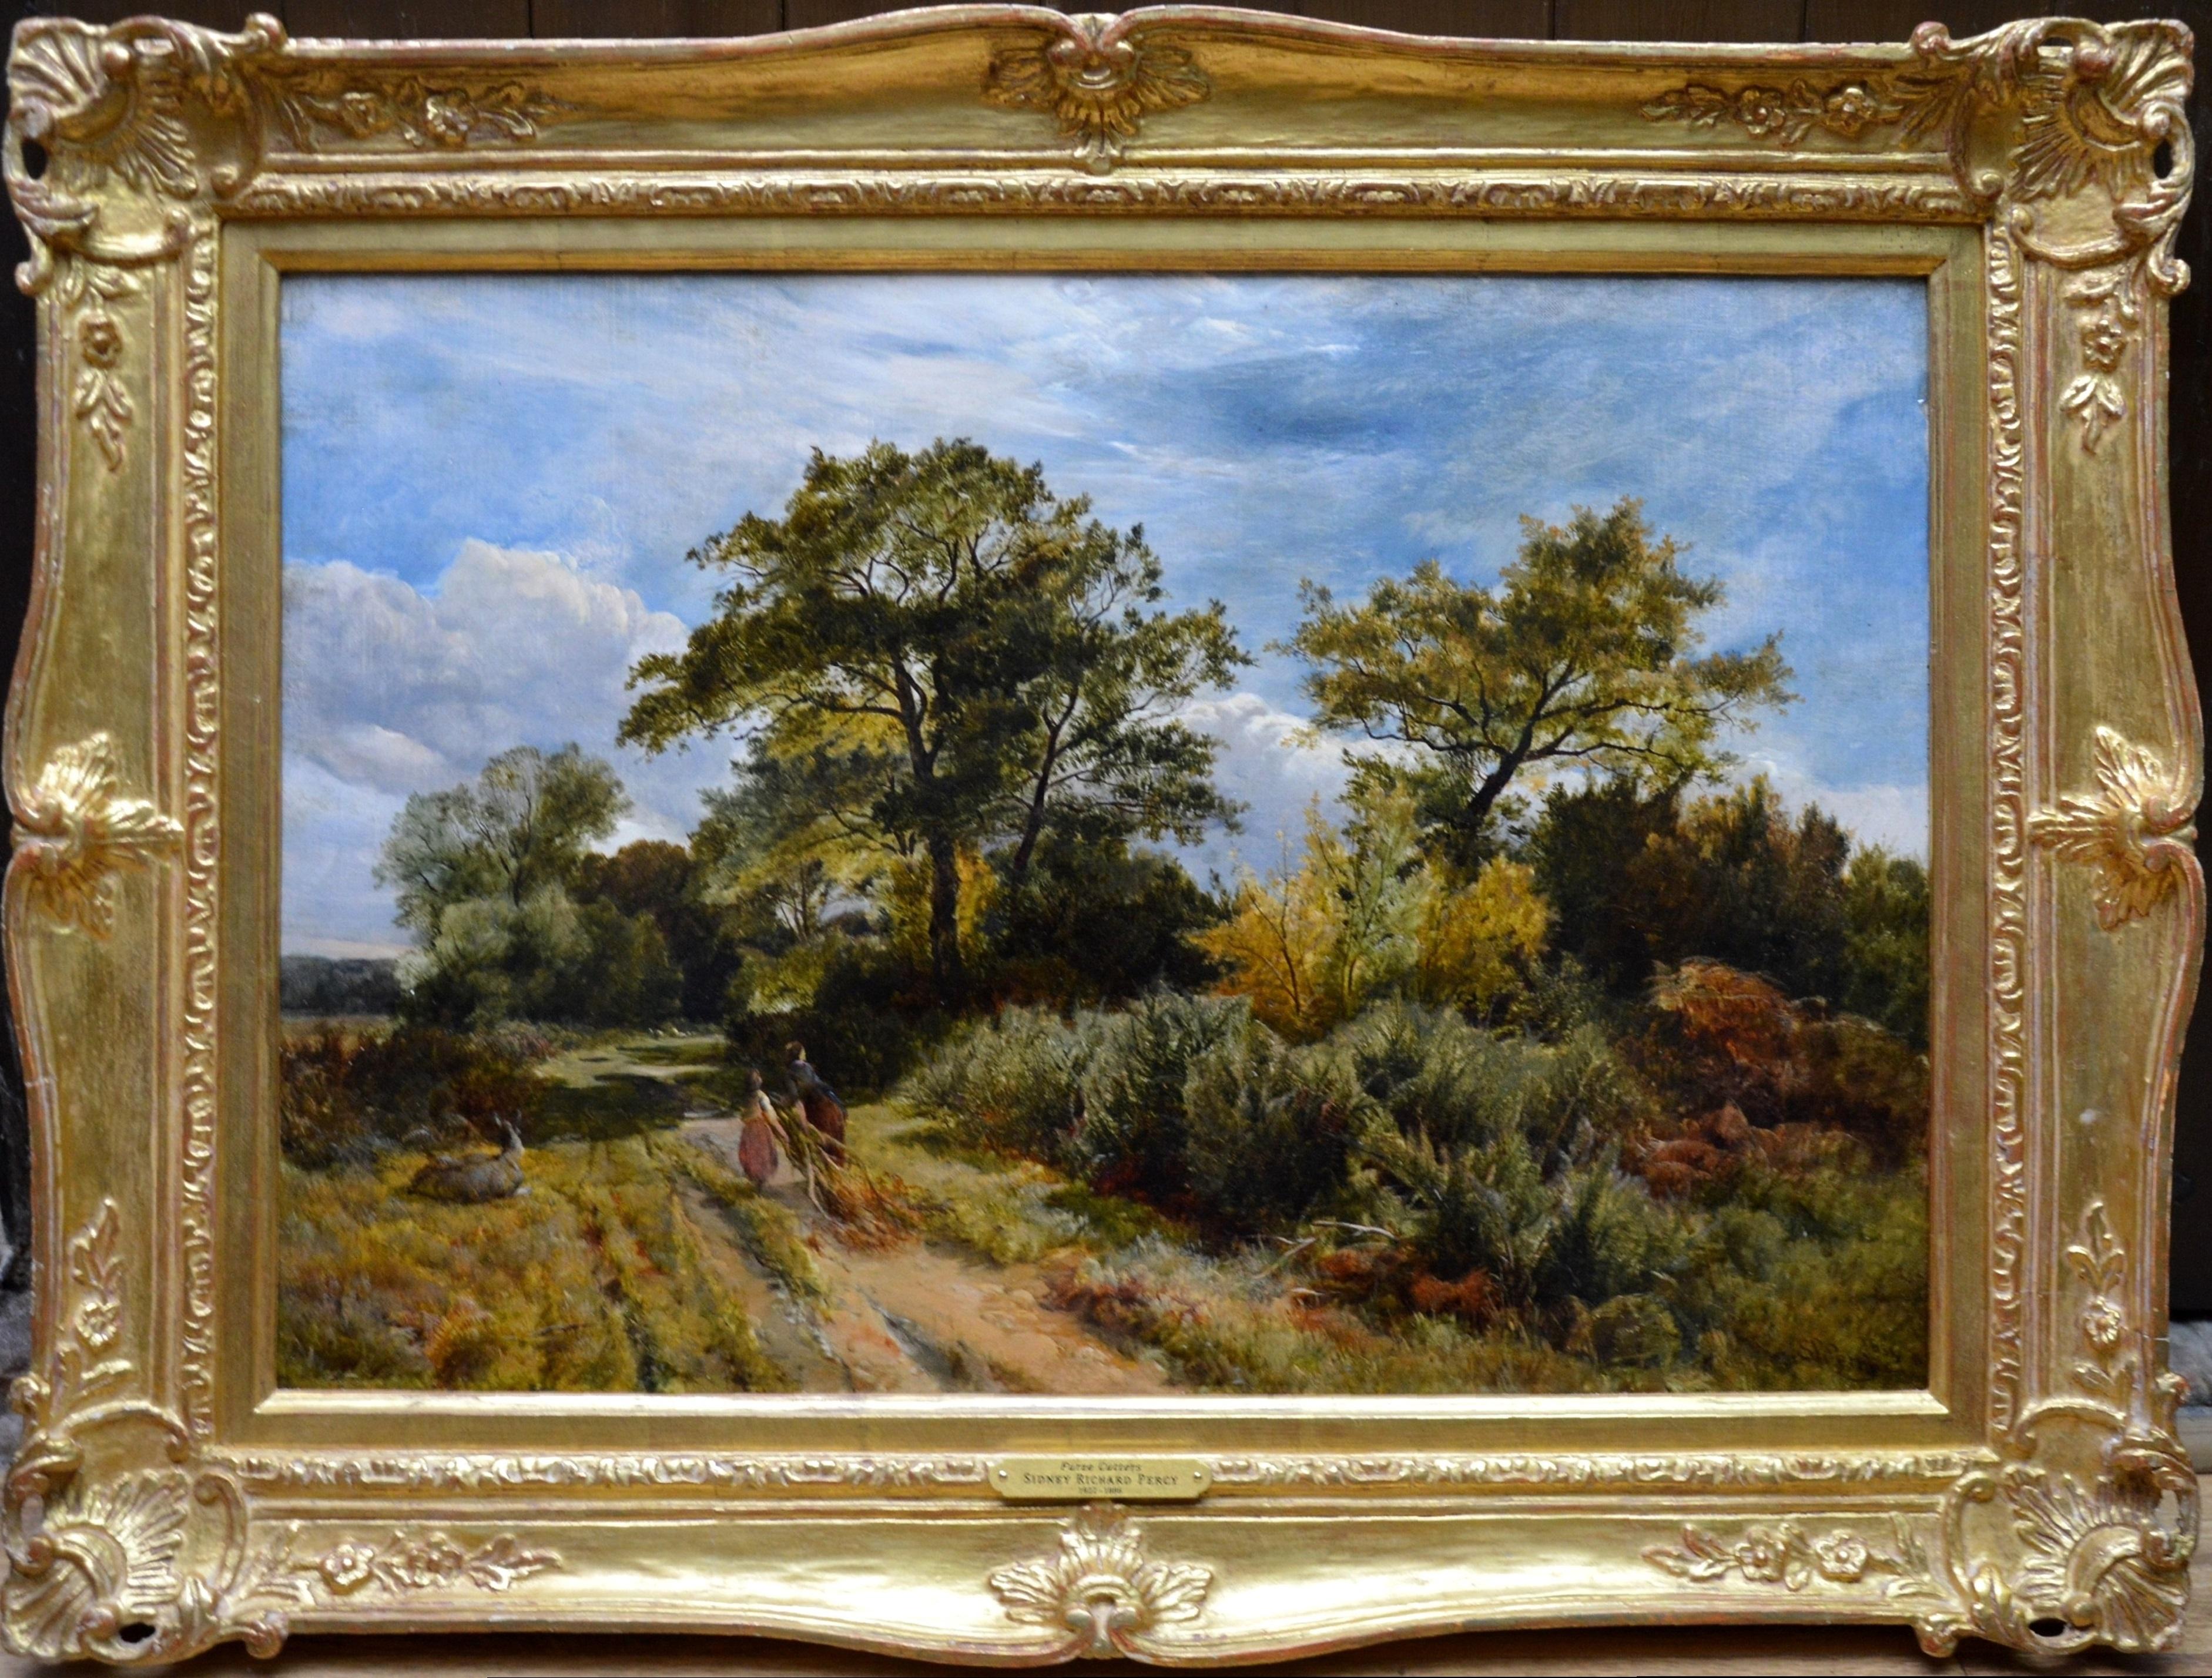 Sidney Richard Percy Landscape Painting – Furze Cutters - 19th Century Landscape Oil Painting - Royal Academy 1851